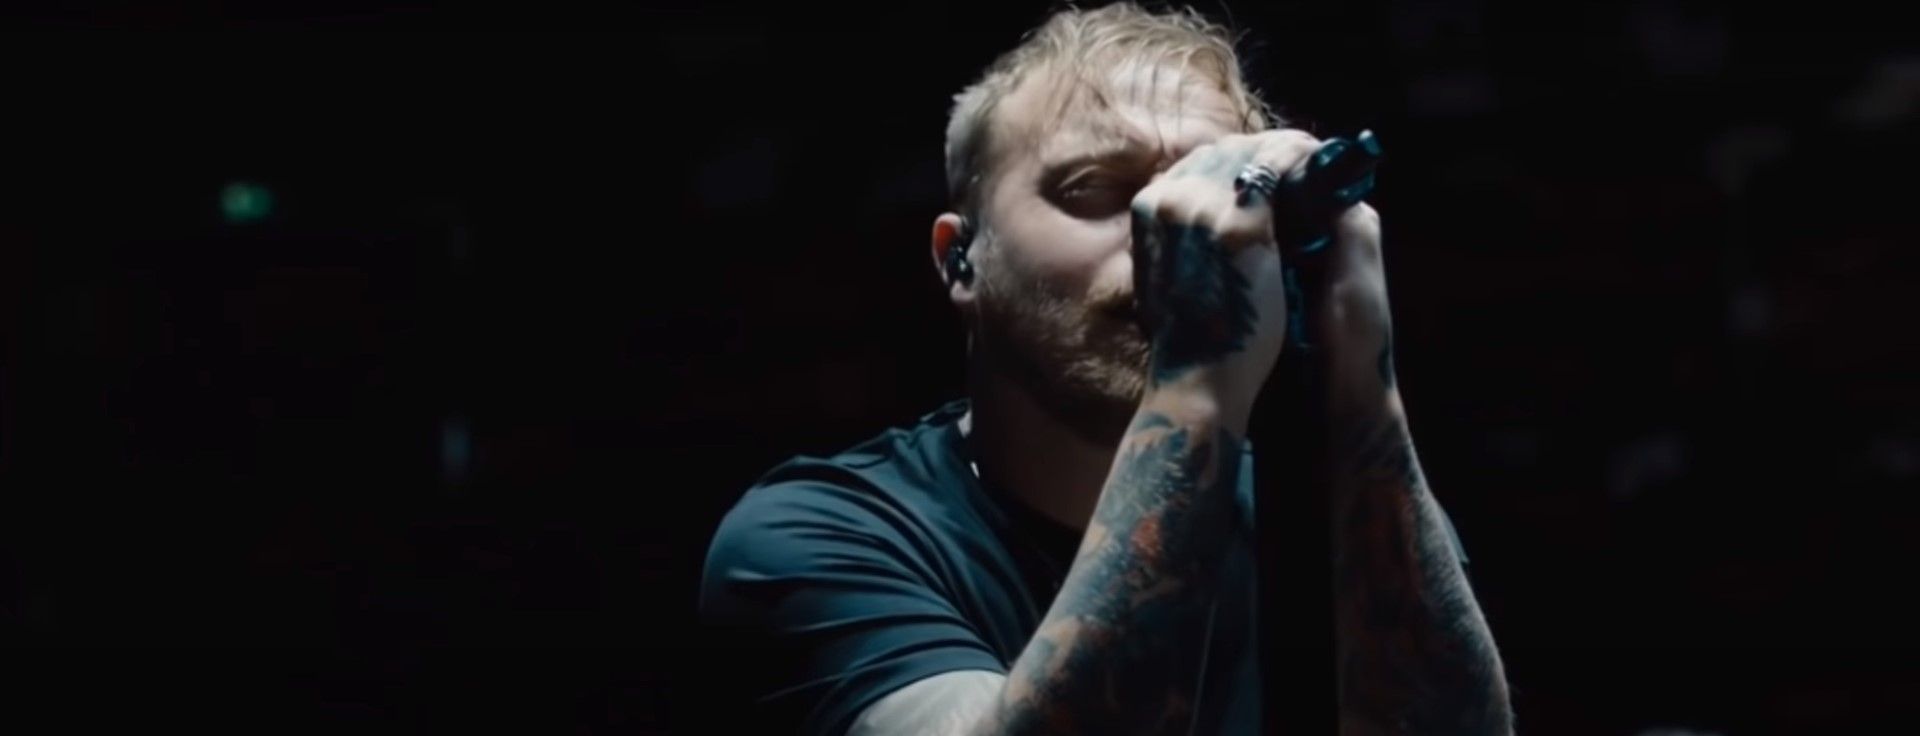 Architects - Memento Mori / A Wasted Hymn (Live In London 2020)